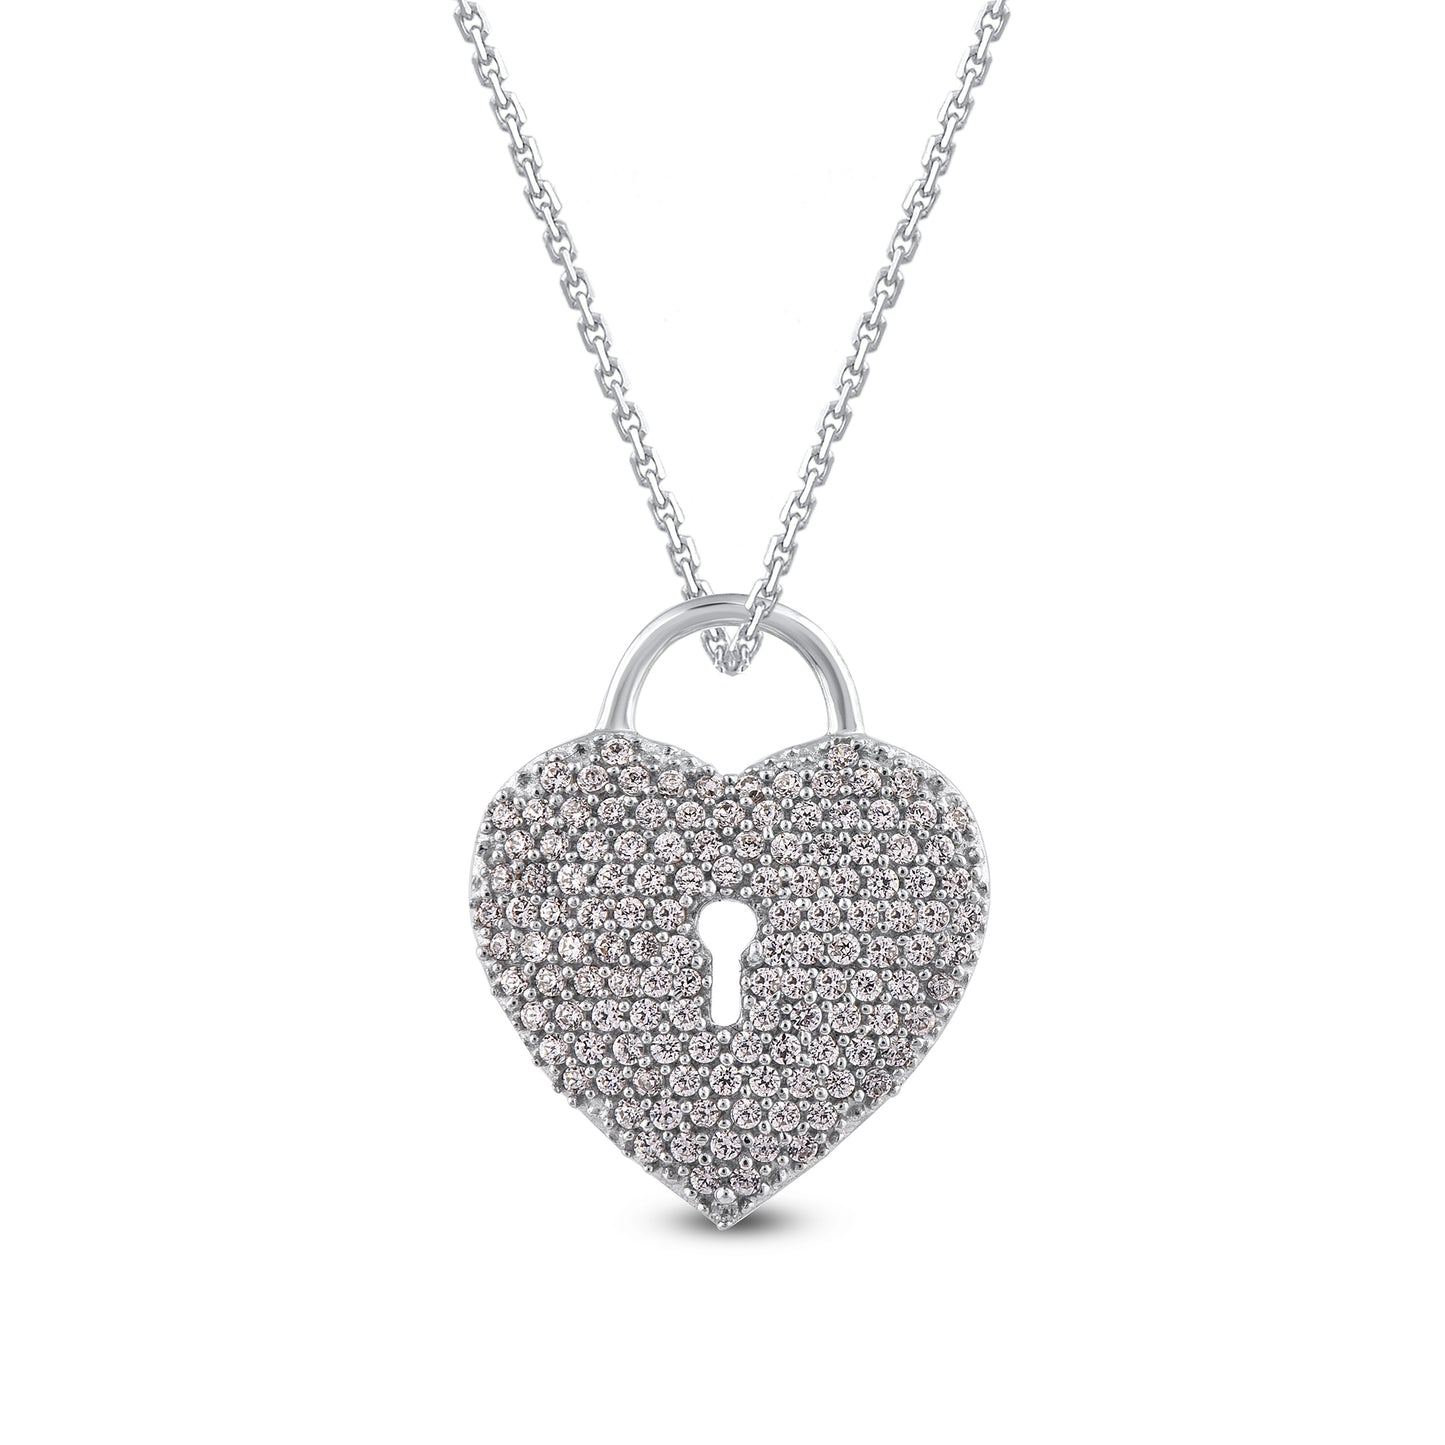 Heart Lock Pendant Necklace 925 Sterling Silver